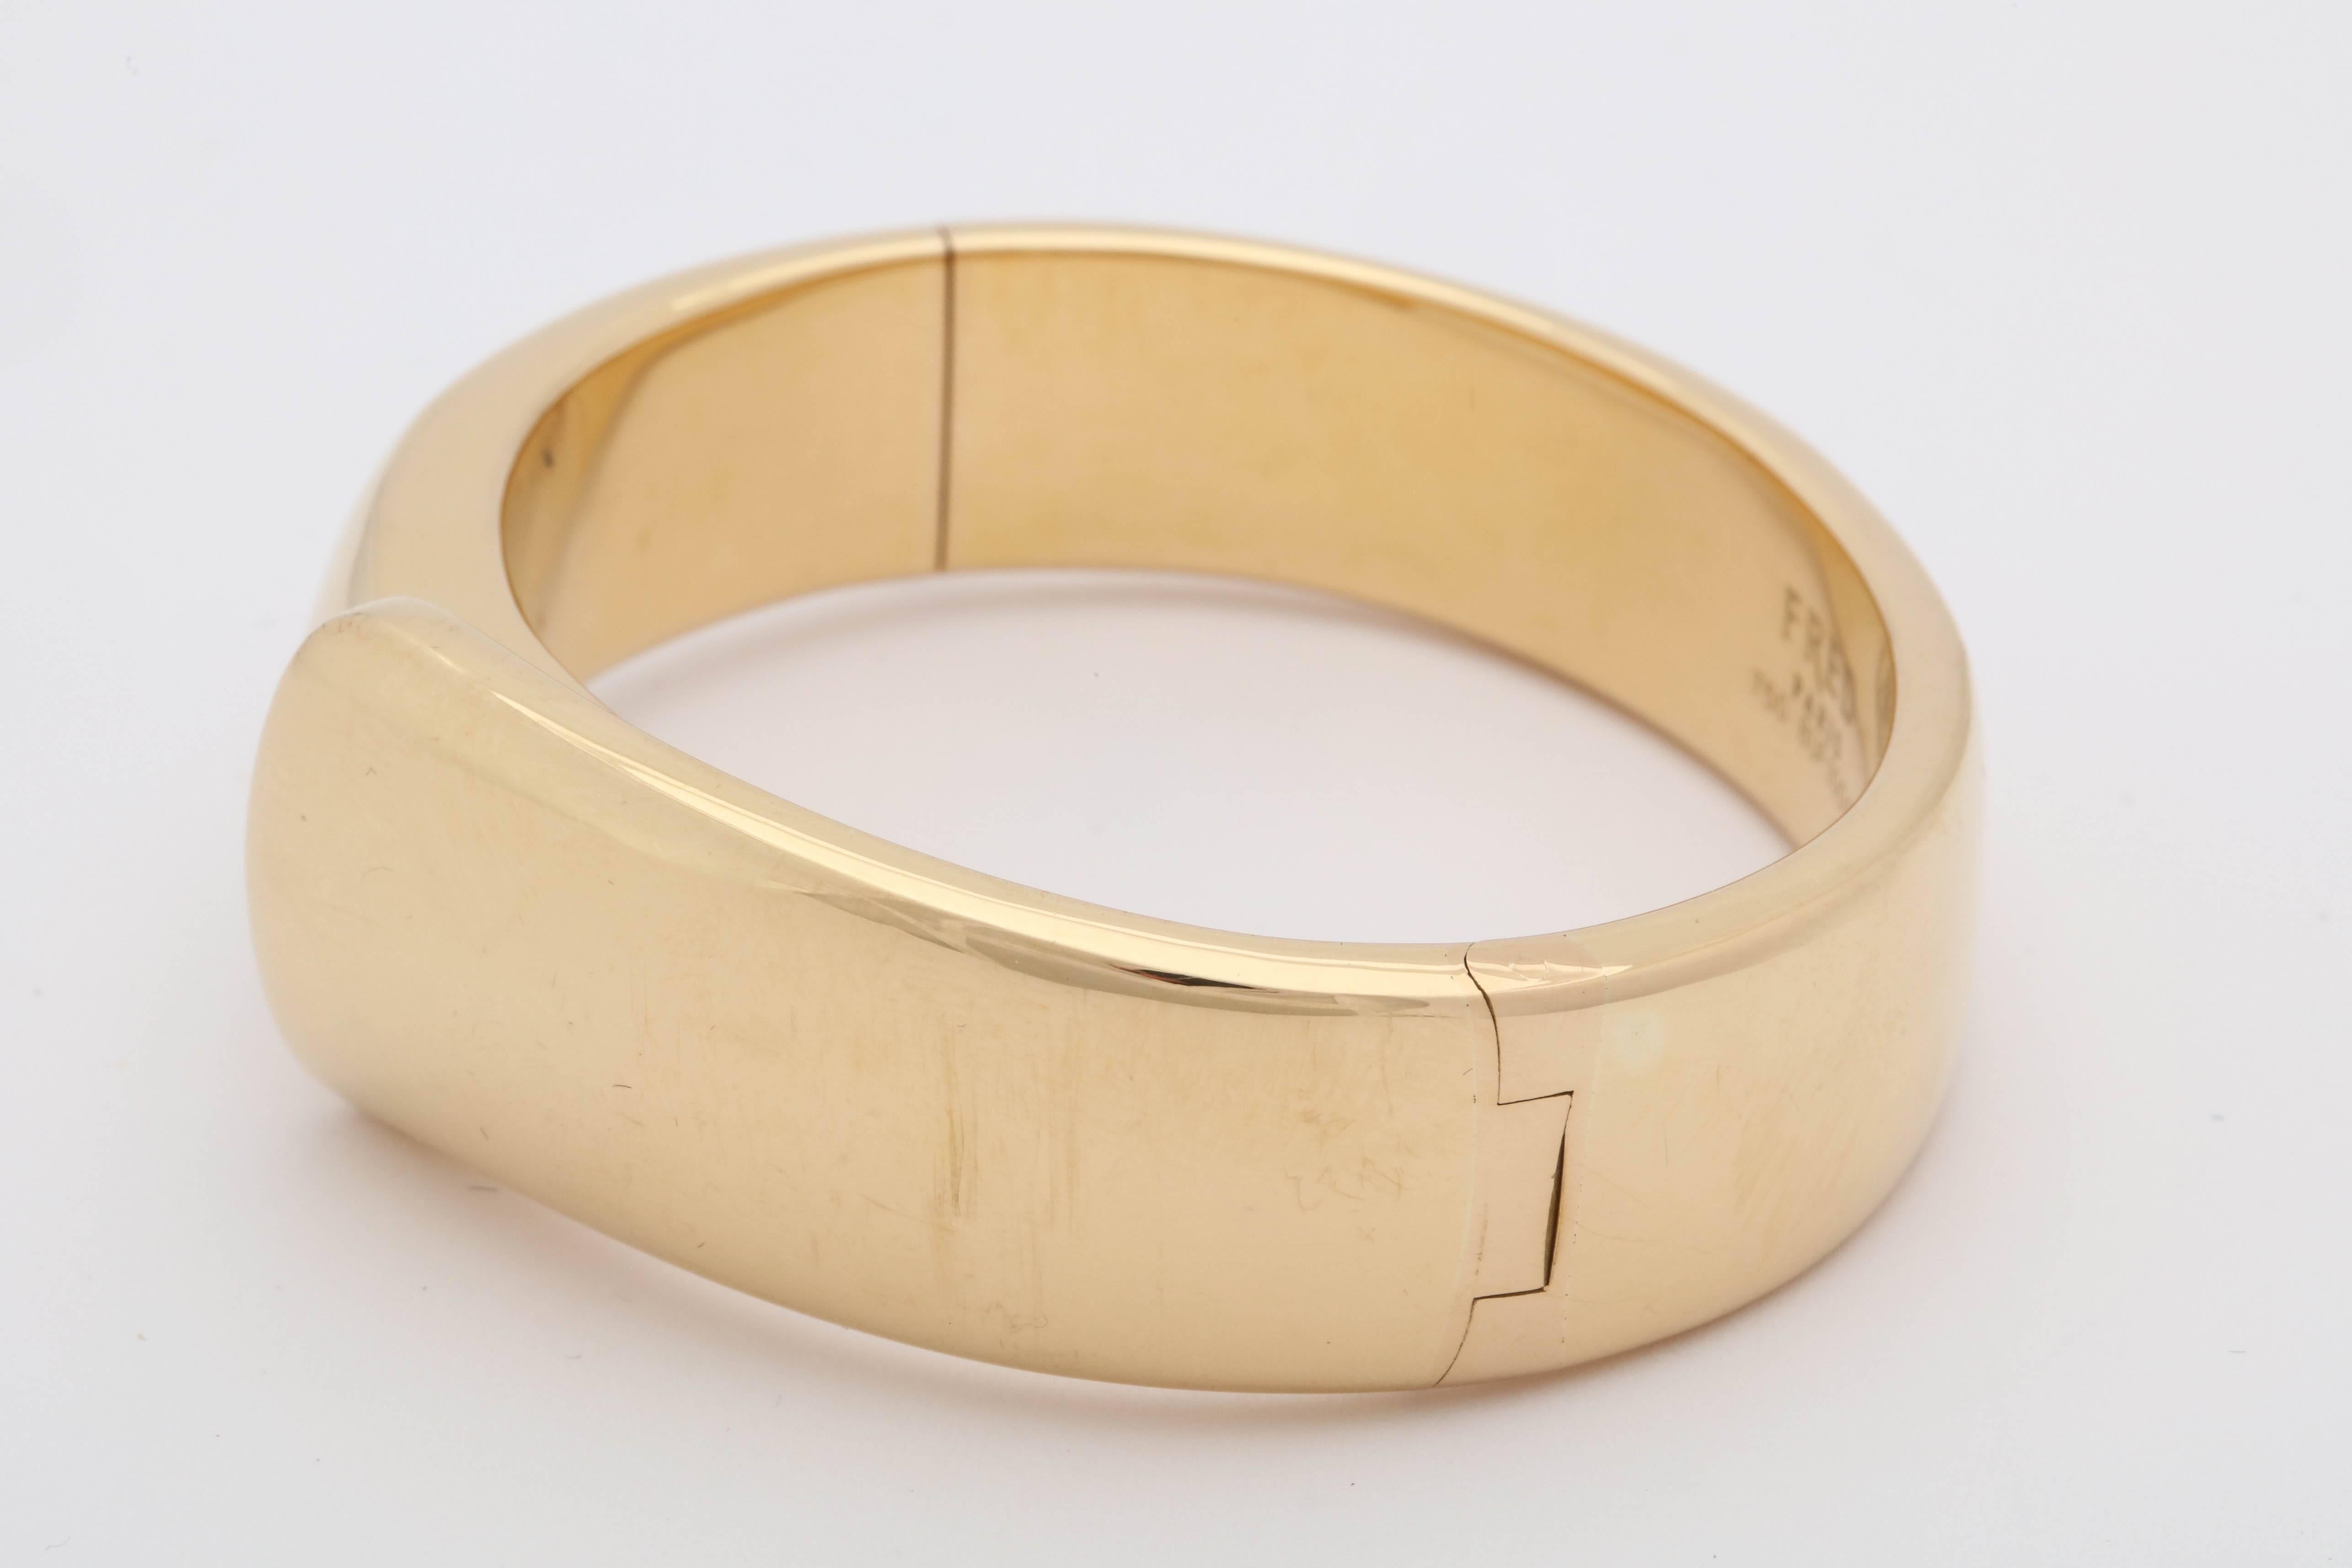 Women's 1980s Fred Paris Chic and Sculptural High Polish Gold Bangle Bracelet with Box